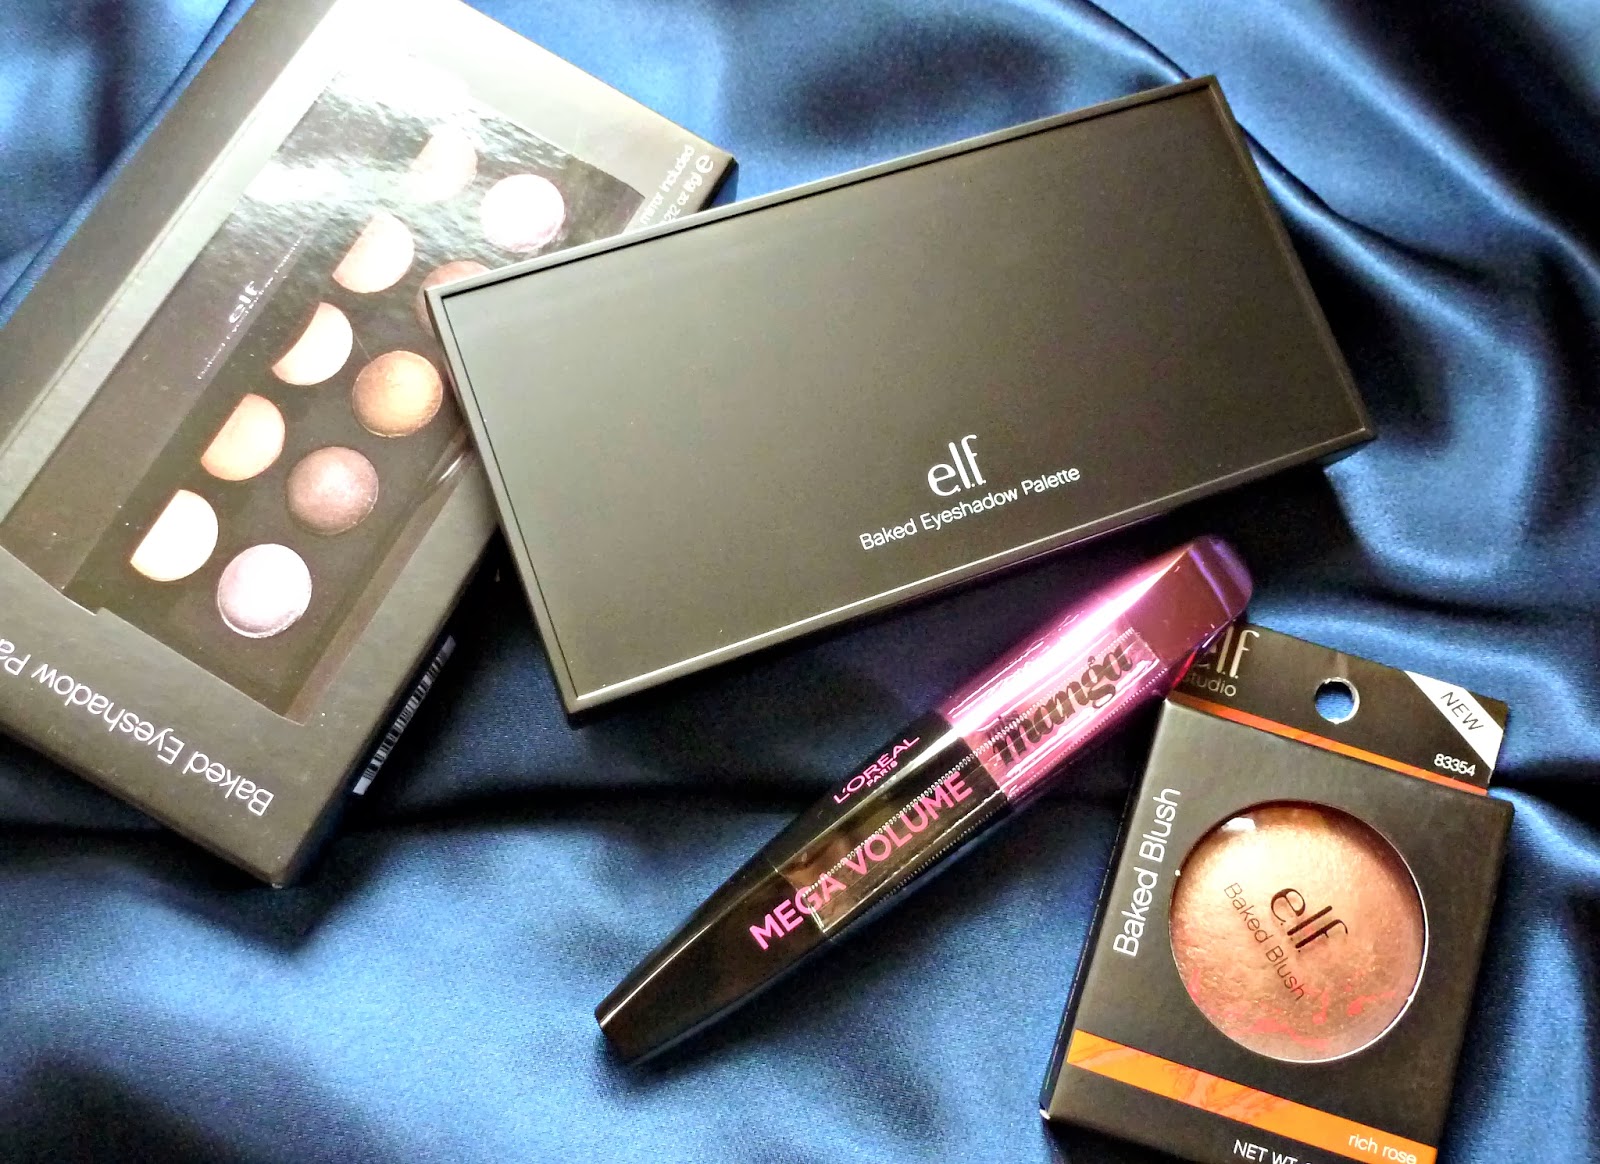 A picture of Elf Baked Eye-Shadow Palette, Baked Blush & L'Oreal Miss Manga Mascara